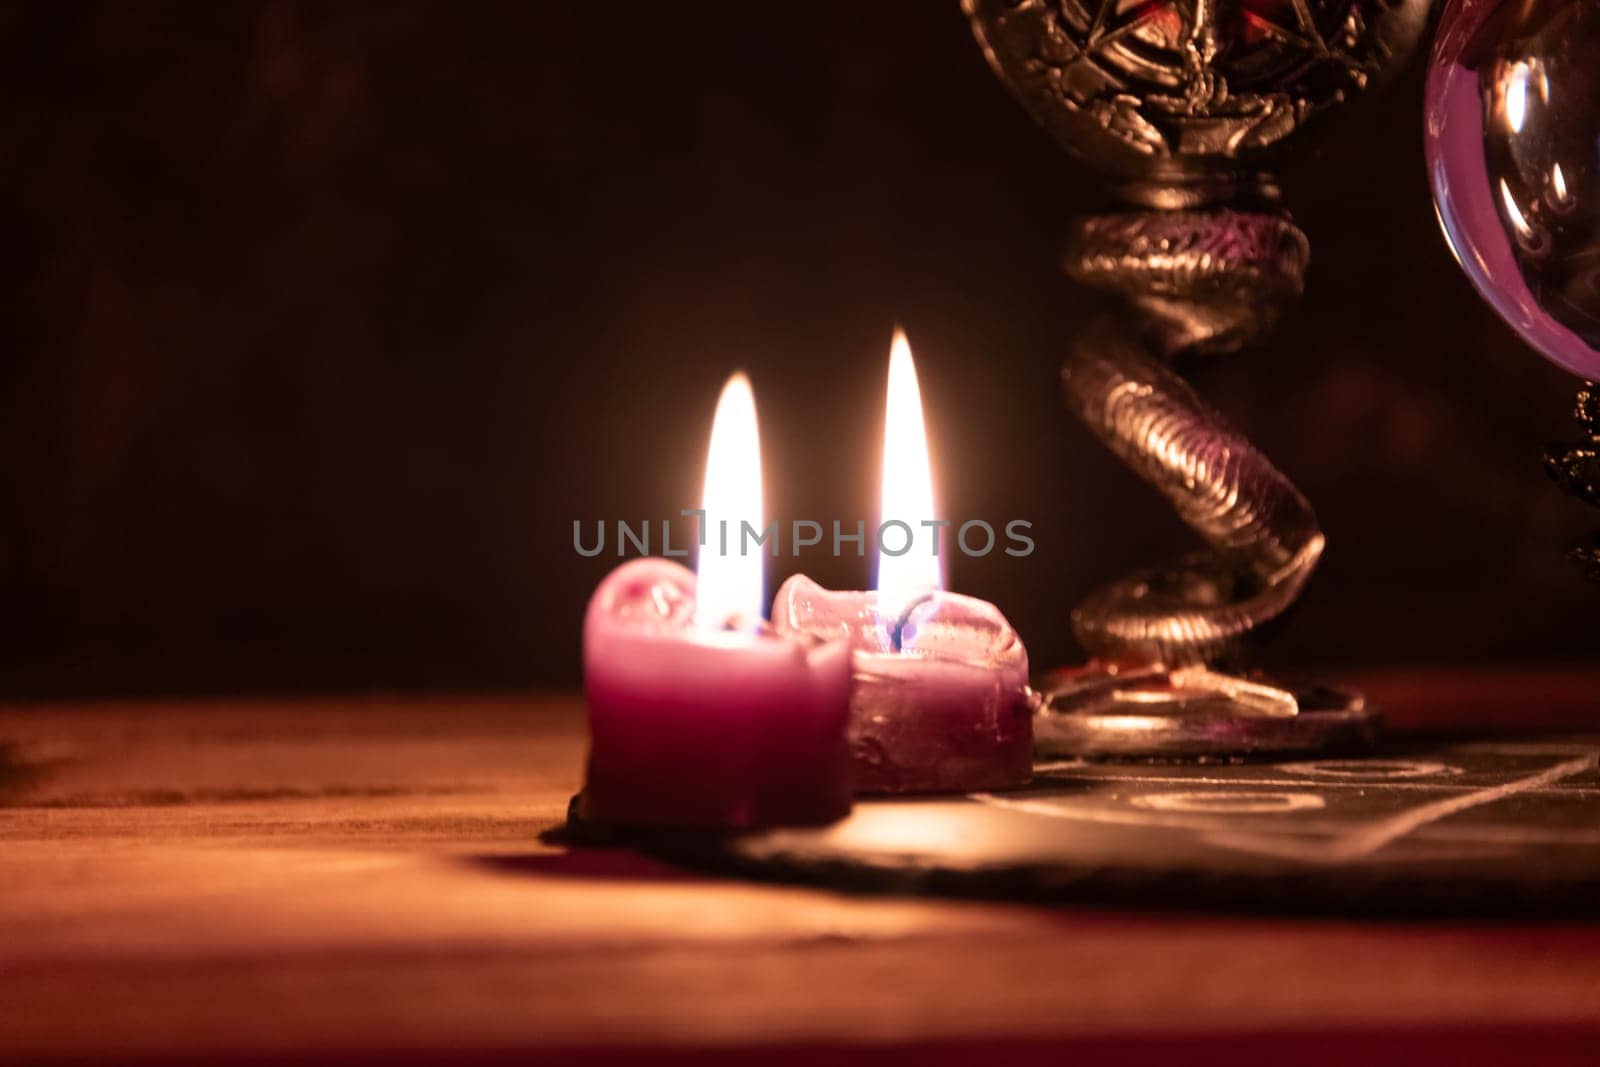 A detailed close-up shot of two lit pink candles with a dark, mystical background, emphasizing a ritualistic theme